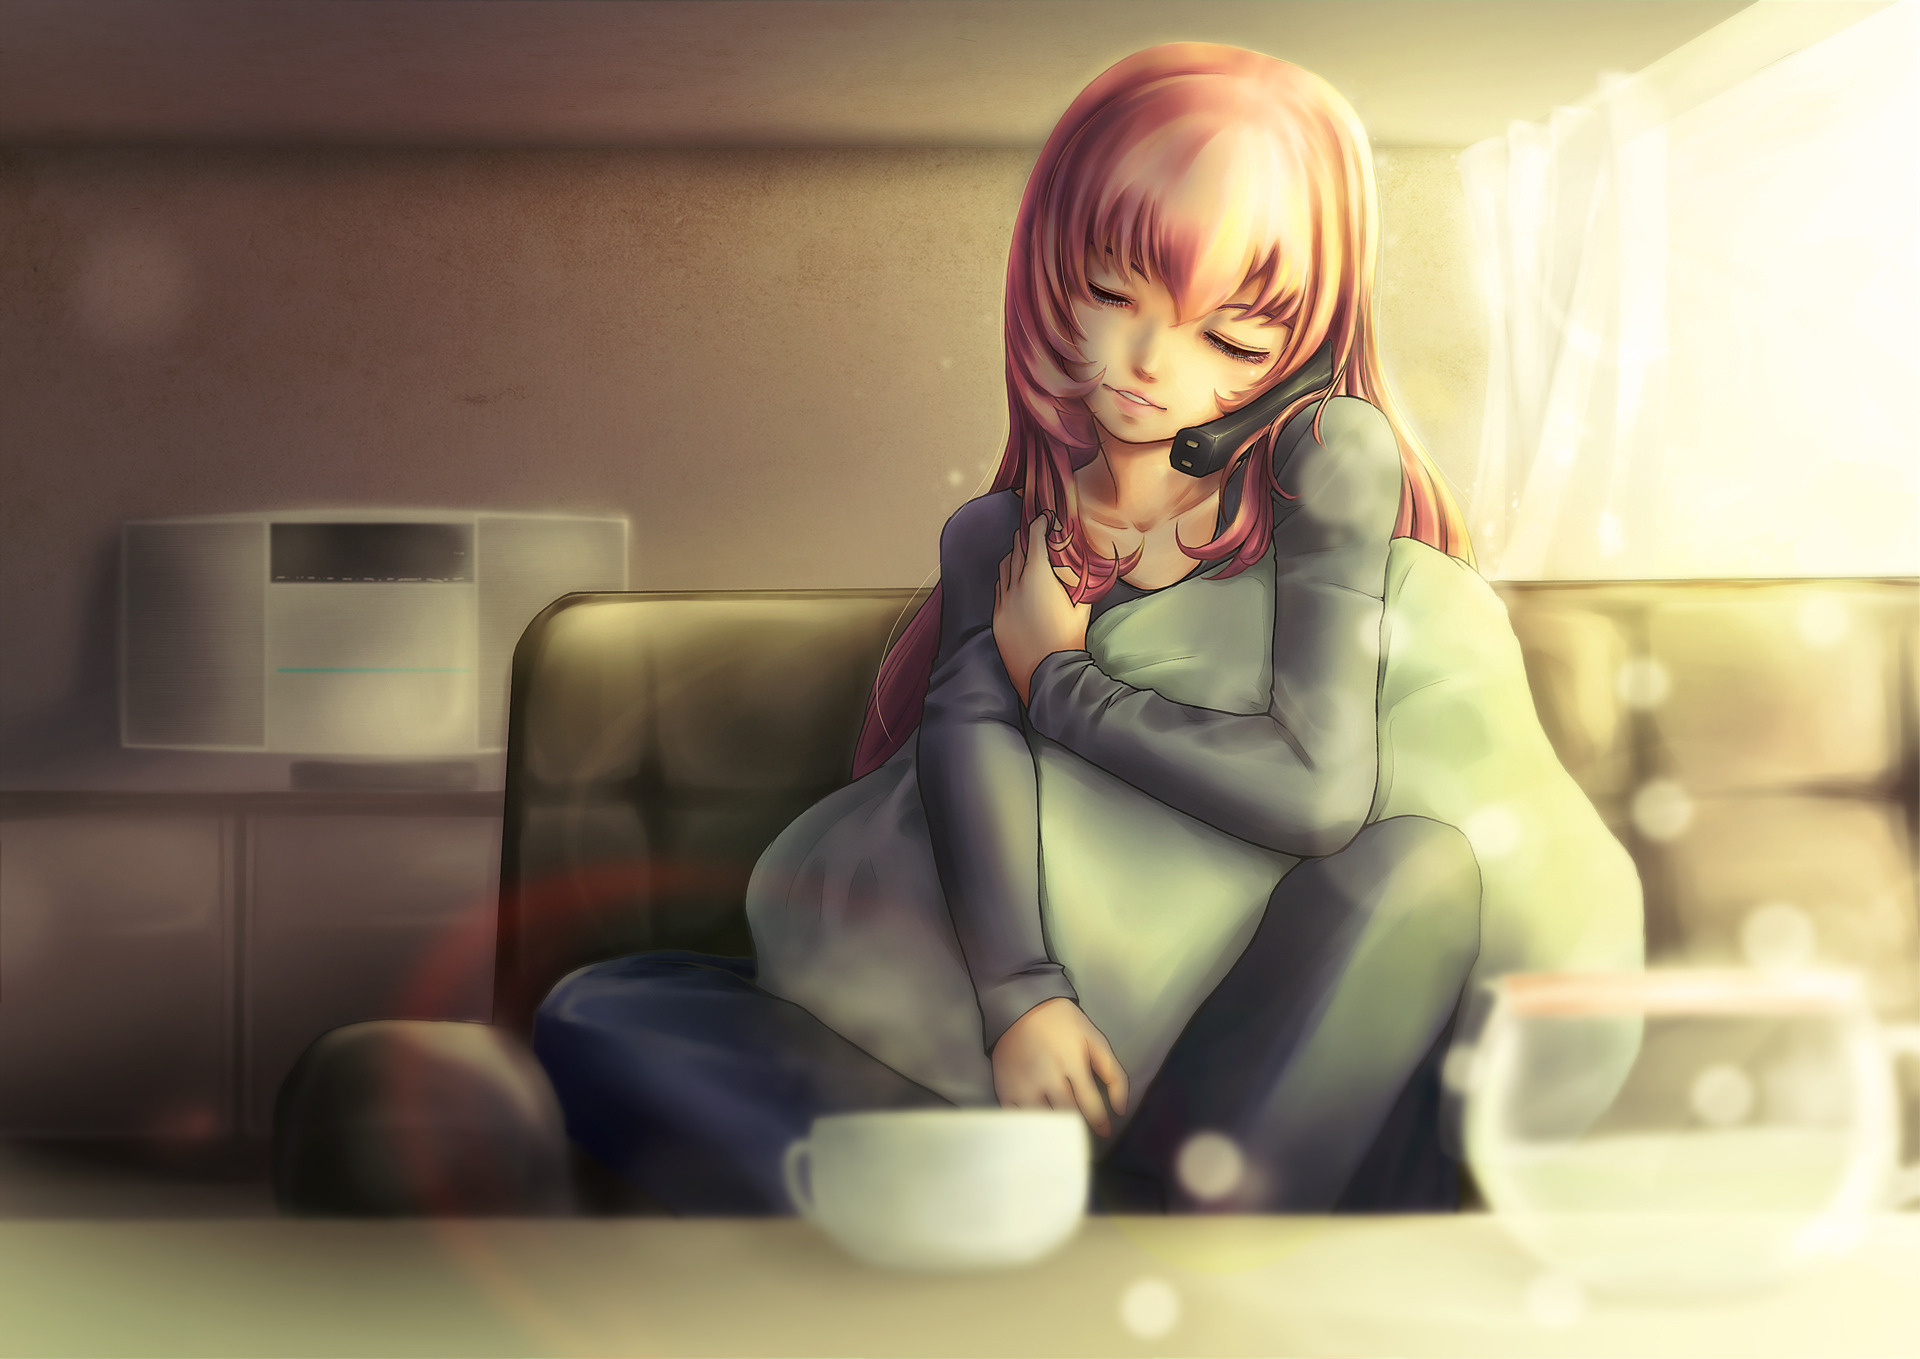 Megurine Luka, Anime, Girl, Blur - Lonely Single Sad Quotes , HD Wallpaper & Backgrounds